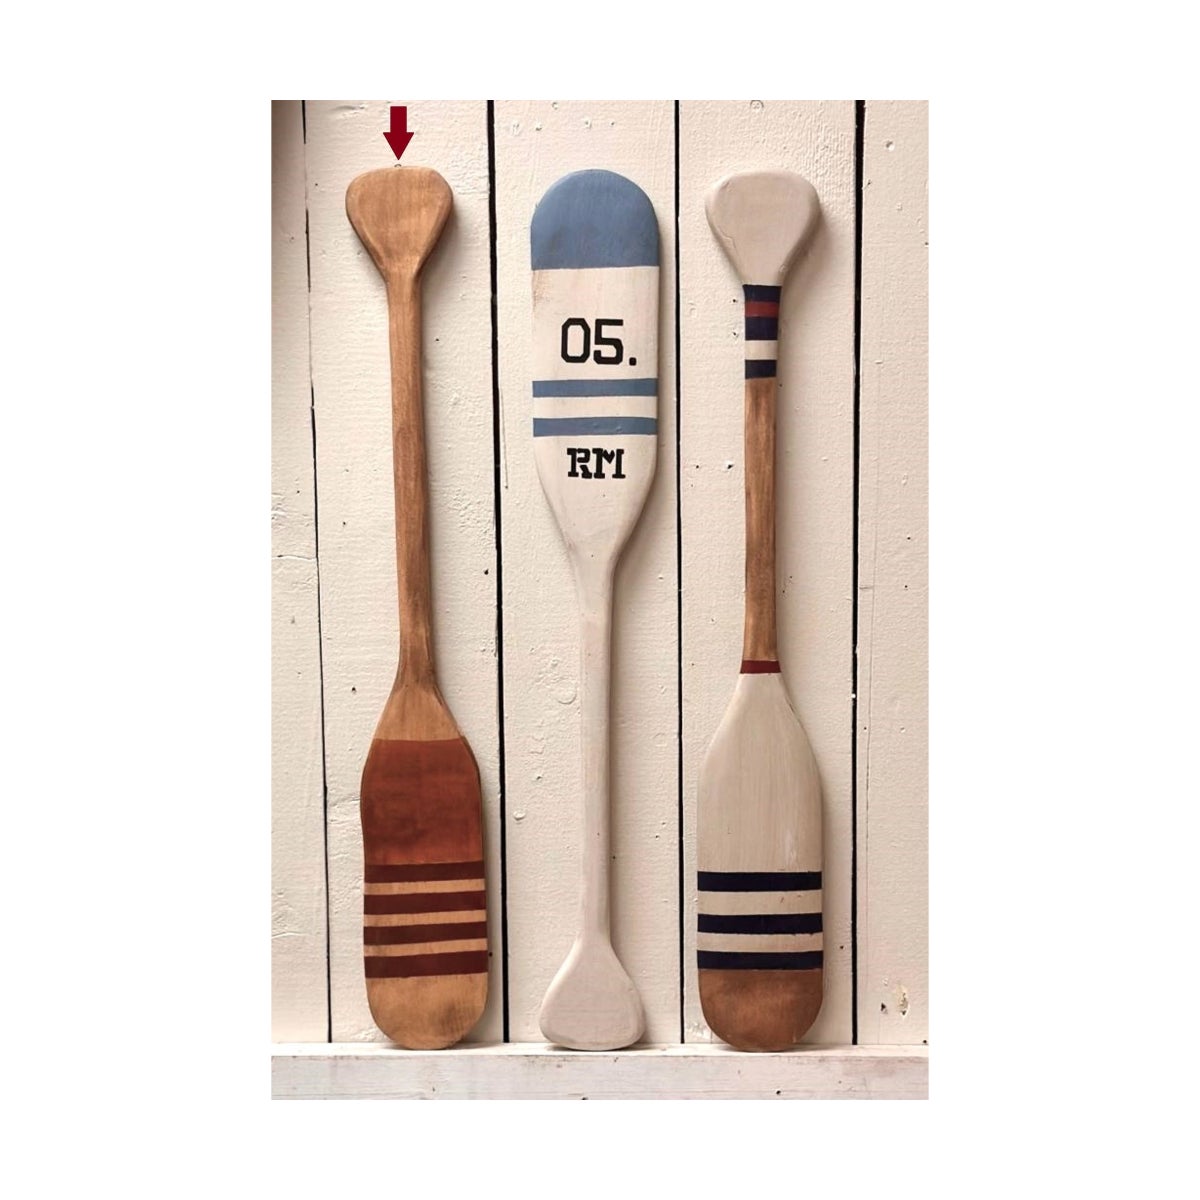 Wooden Paddle 70cm